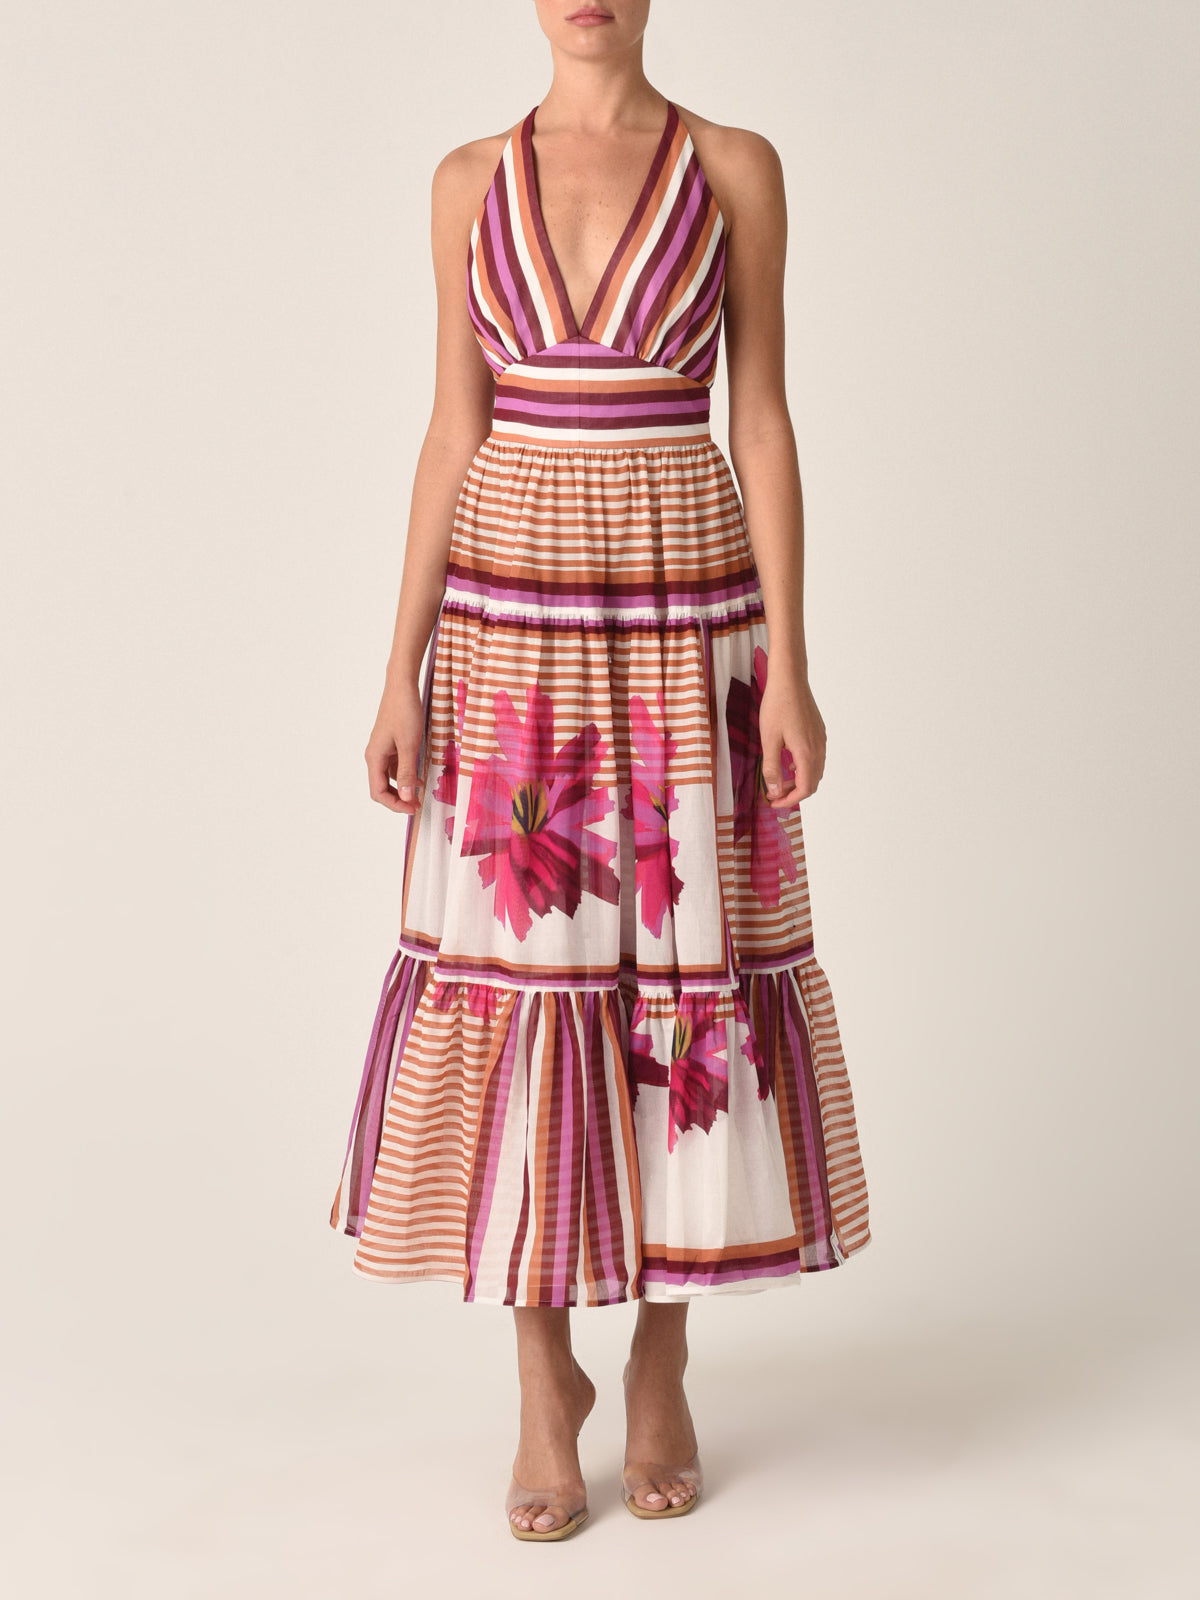 A Valerie Dress Magenta Floral Brushstroke Stripes with pink, peach, and white stripes and transparent sections with magenta floral brushstroke designs, isolated on a white background.